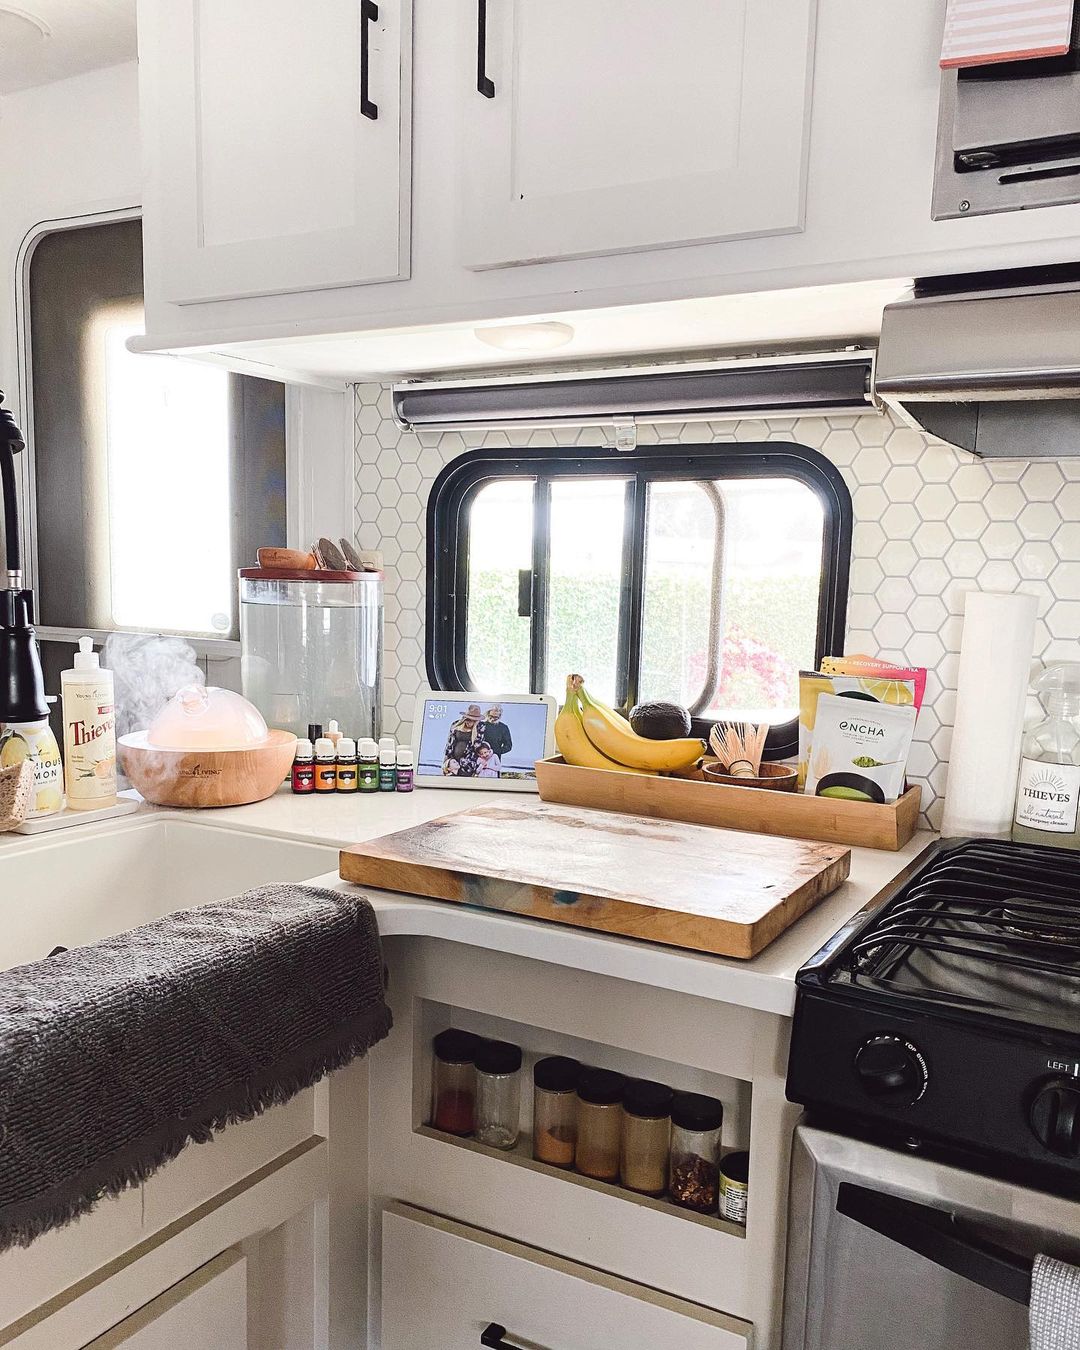 Clean Kitchen Area in an RV. Photo by Instagram user @ourstormyskyy